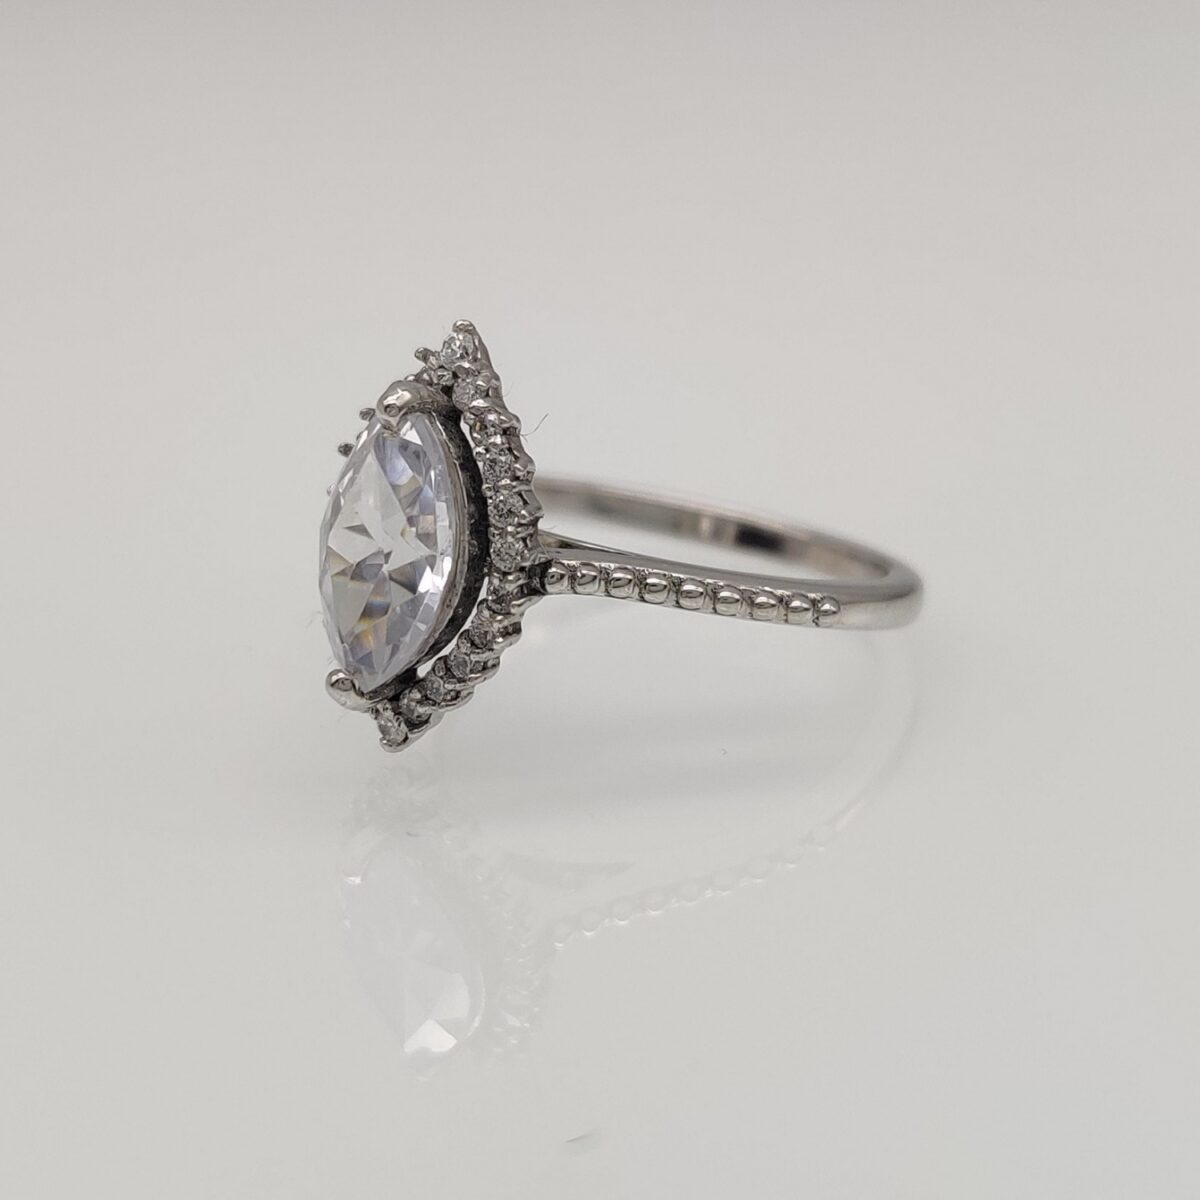 Marquise cut lab grown diamond halo engagement ring crafted in 14k solid white gold.